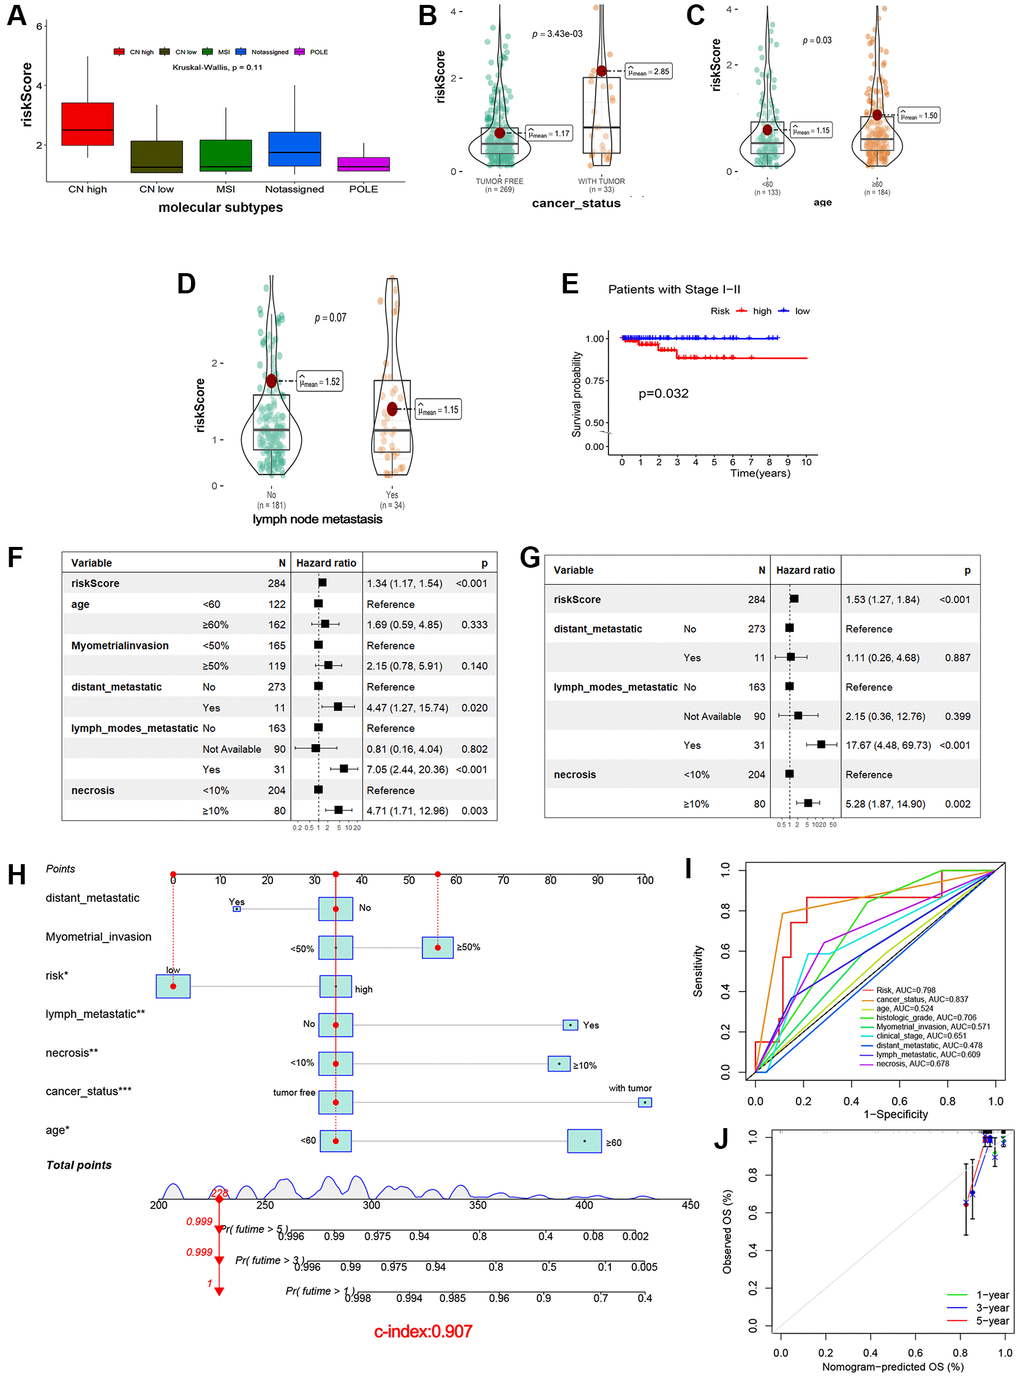 Clinicopathological analysis and prognostic nomogram based on cuproptosis-related lncRNAs signature. (A–D) Correlation between risk score and molecular subtypes (A), cancer status (B), age (C), and lymph node metastasis (D). (E) Correlation between risk score and survival probability in patients at stage I–II. (F, G) Univariate and multivariate Cox regression analysis. (H) Nomogram for predicting probabilities of EEA patient 1-, 3-, 5-year OS in the TCGA cohort. (I) ROC curves showing the predictive efficiency of the nomogram. (J) Calibration plots of 1-, 3-, and 5-year OS predicted by the nomograms.